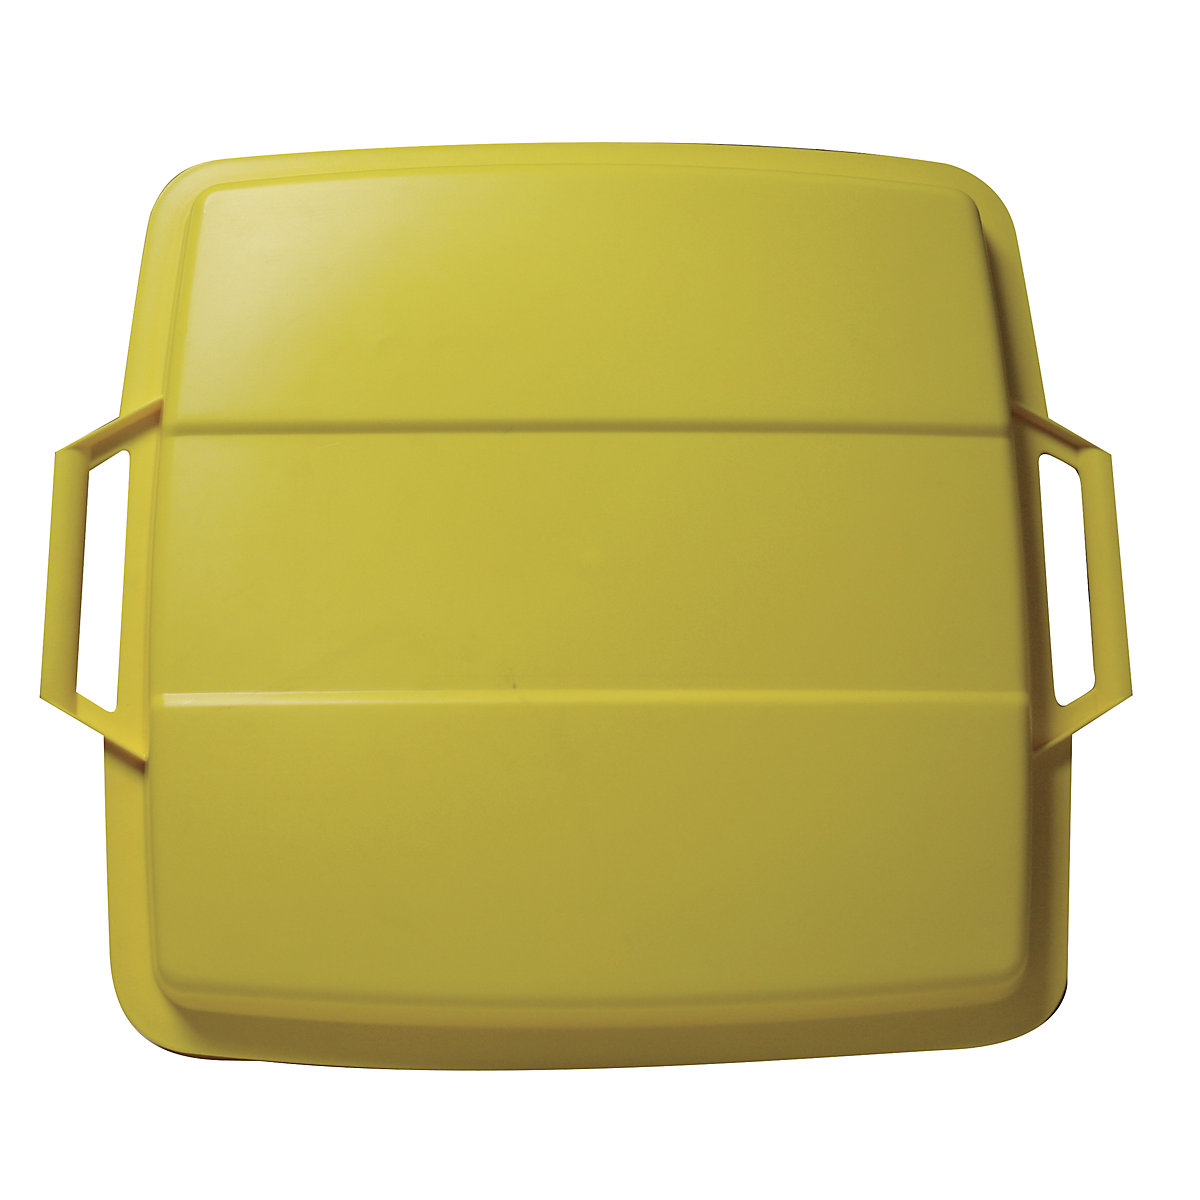 Snap-on lid, with 2 handles